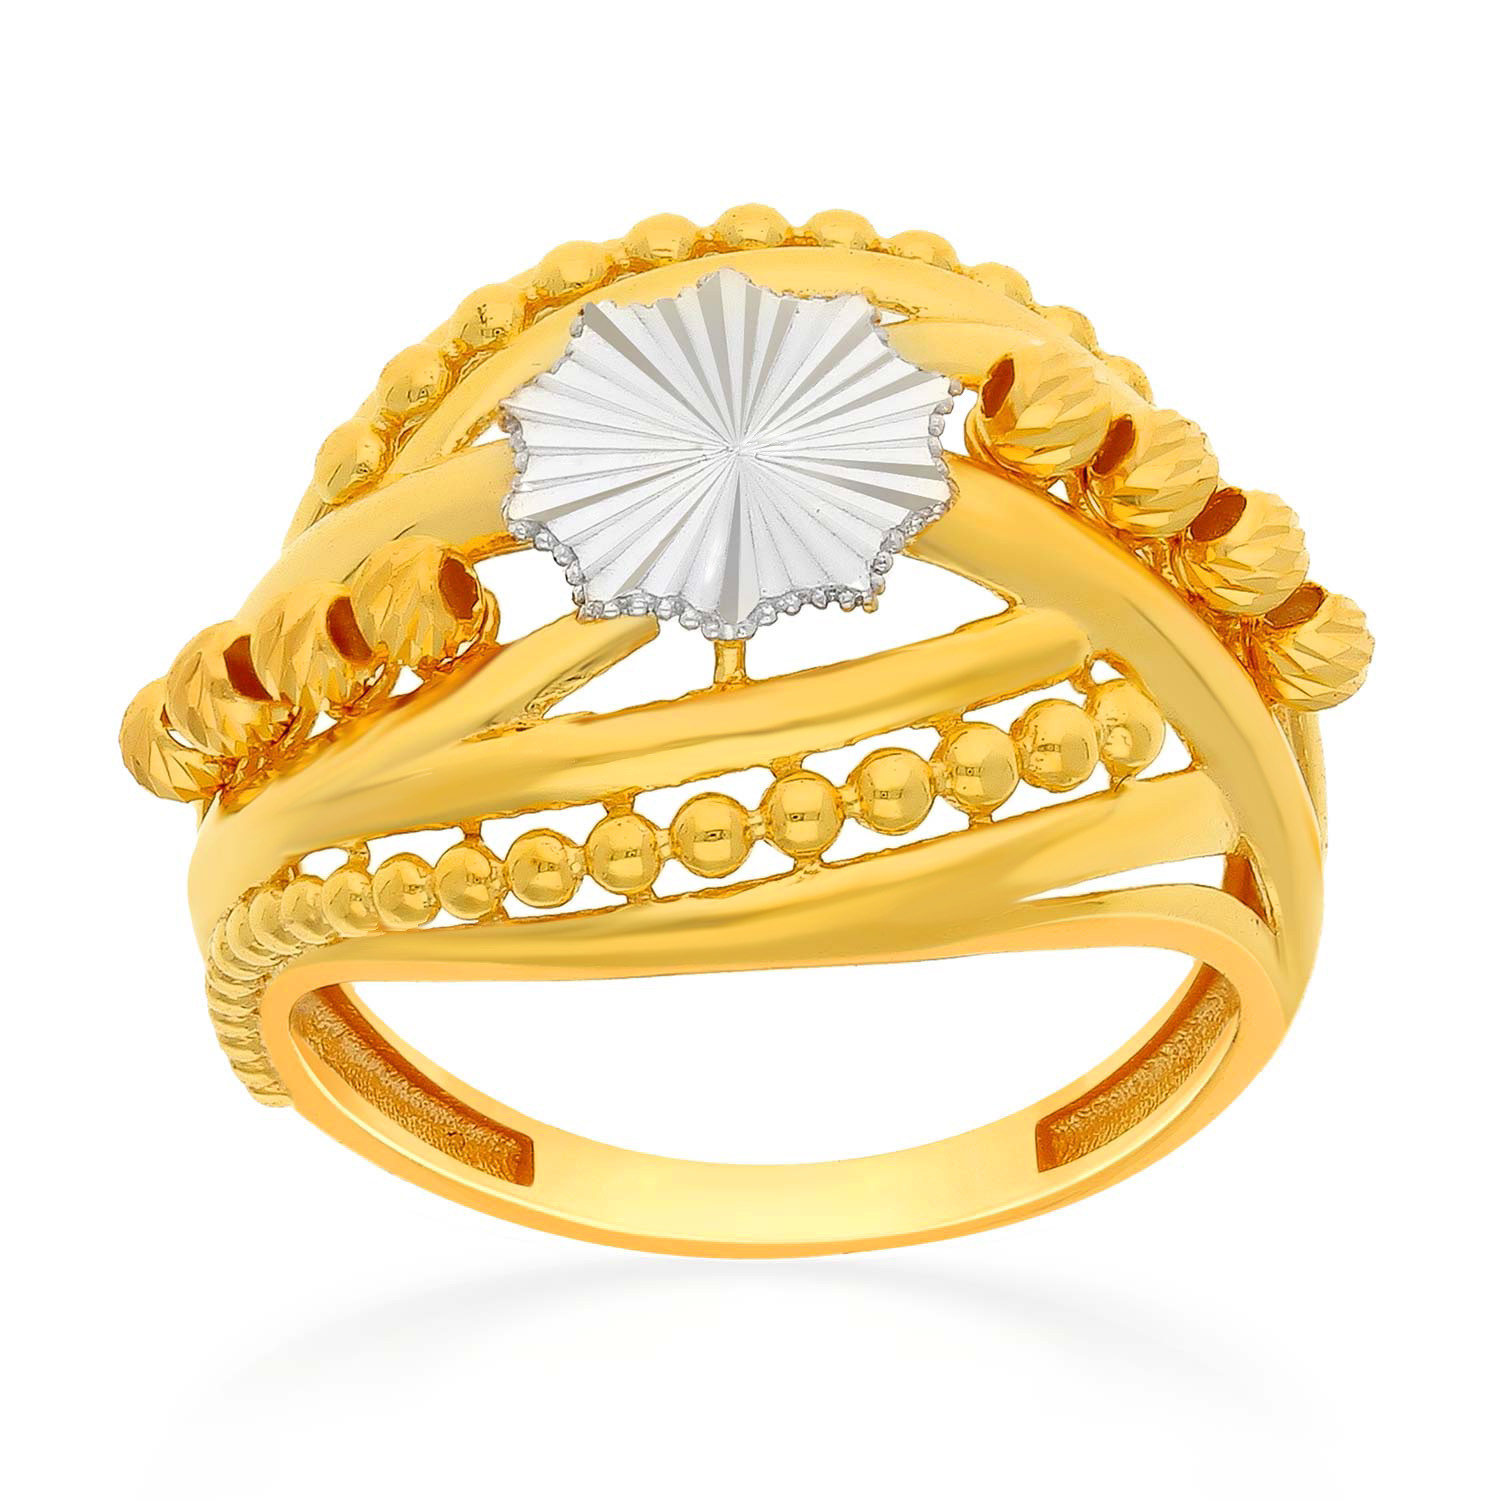 Malabar Gold and Diamonds 22 KT Yellow gold Casual Ring for Women, BIS  Hallmark 916 gold certified FRDZL24420_Y_10 : Amazon.in: Jewellery